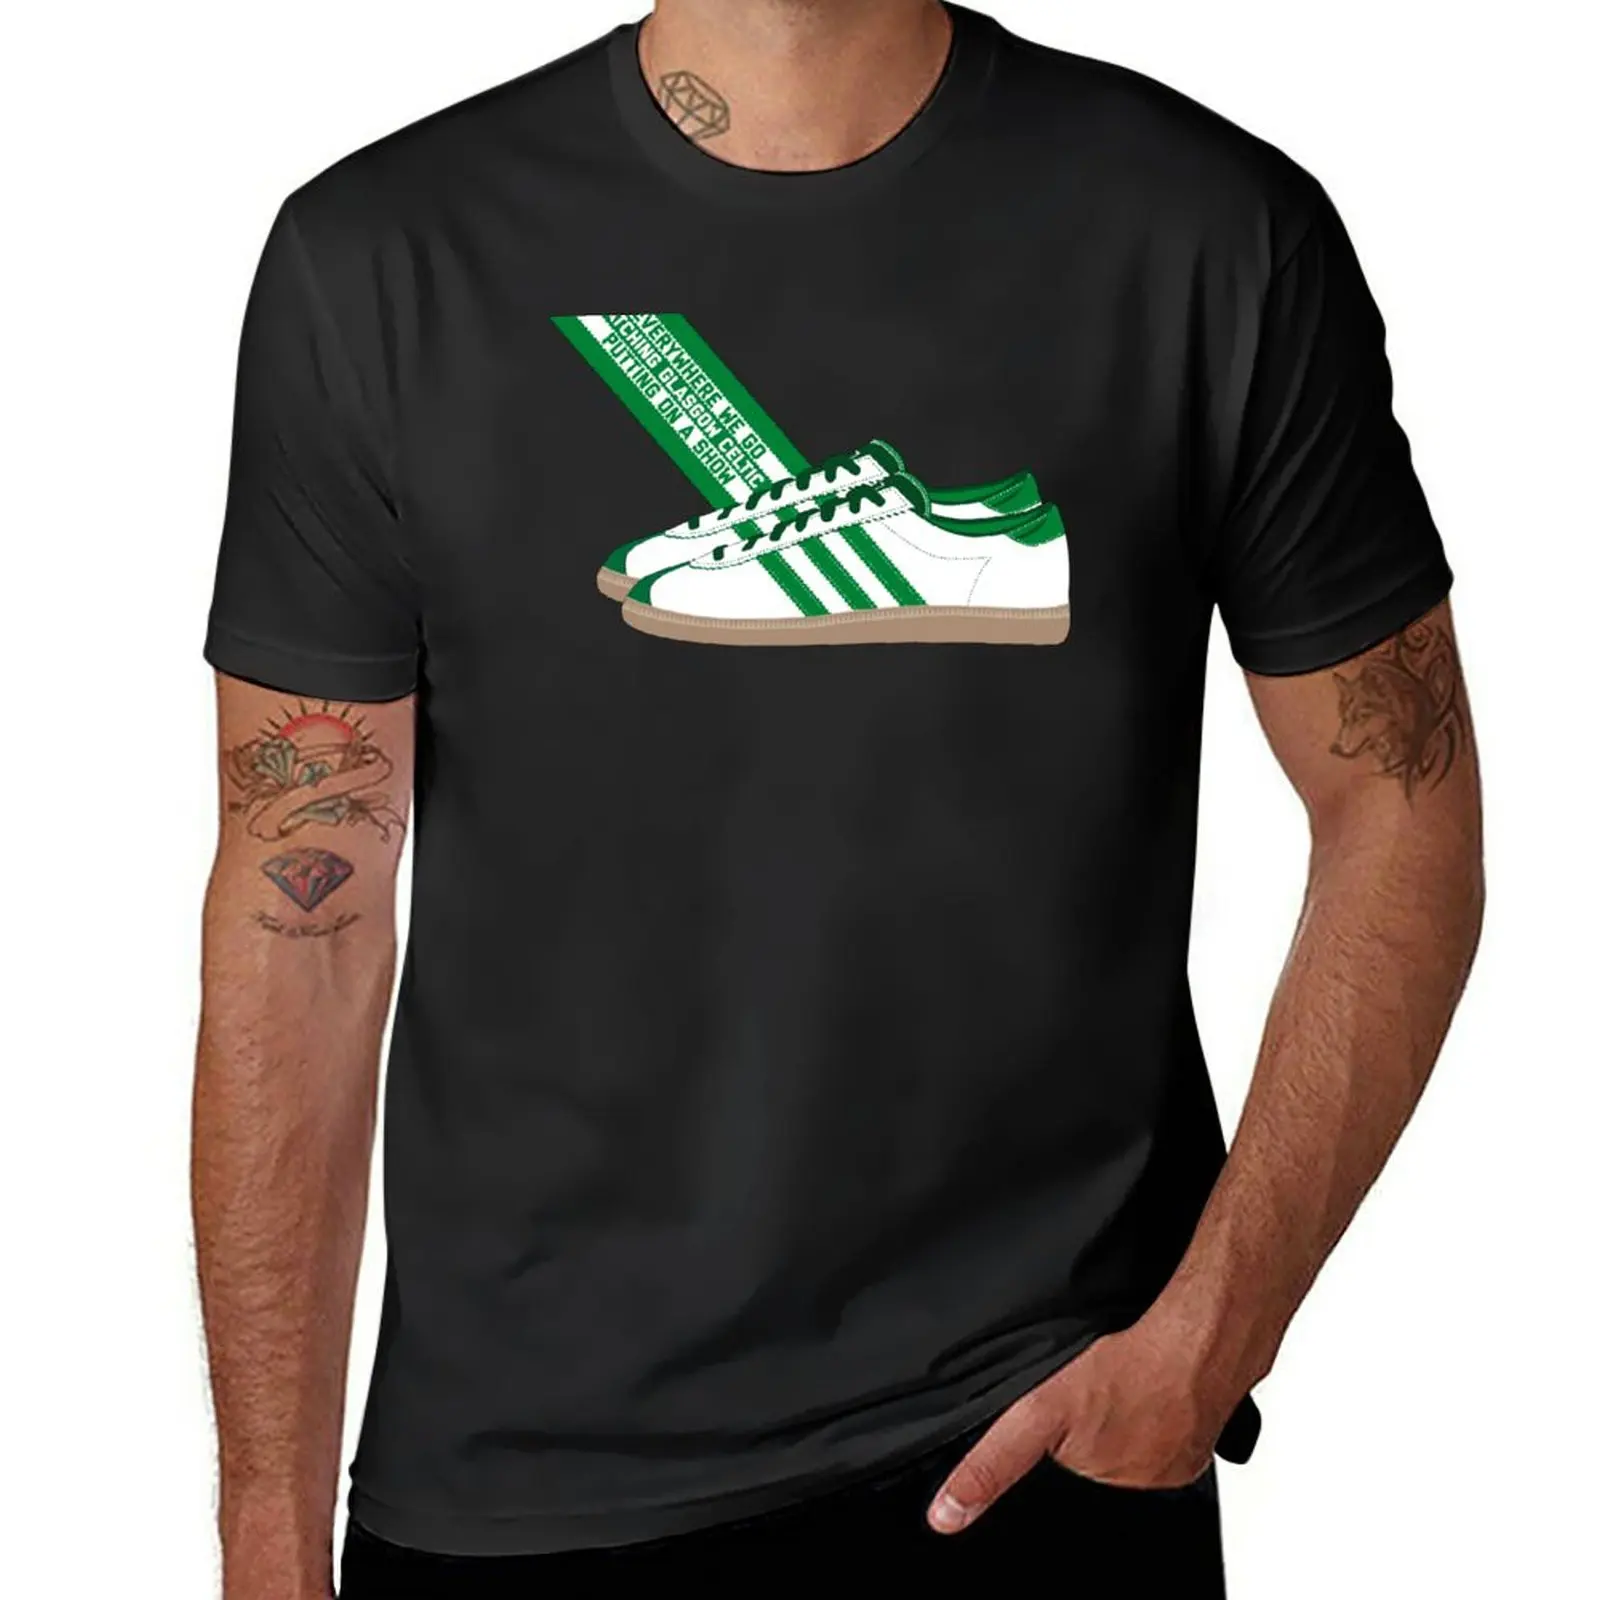 

New Everywhere We Go, Watching Glasgow Celtic, Putting On A Show T-Shirt heavyweight t shirts black t shirts for men